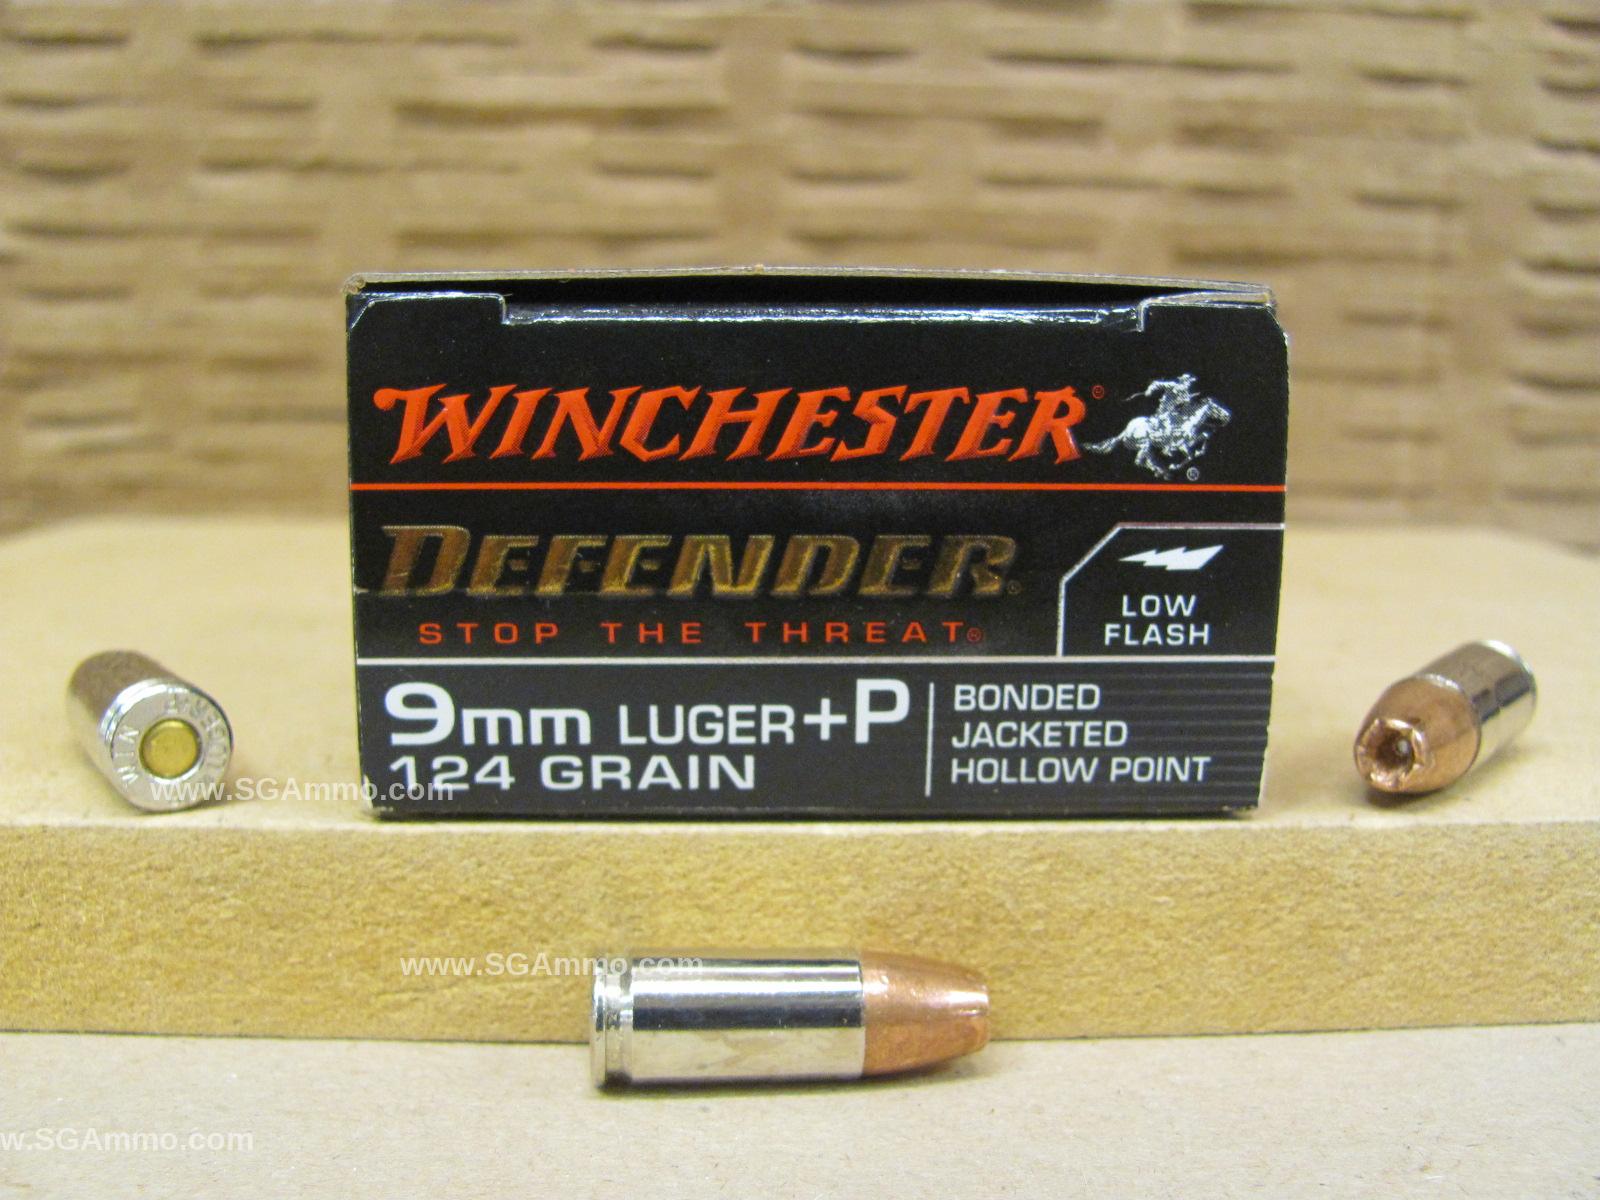 200 Round Case - 9mm Luger +P 124 Grain Bonded Hollow Point - Winchester PDX1 Defender - S9MMPDB 